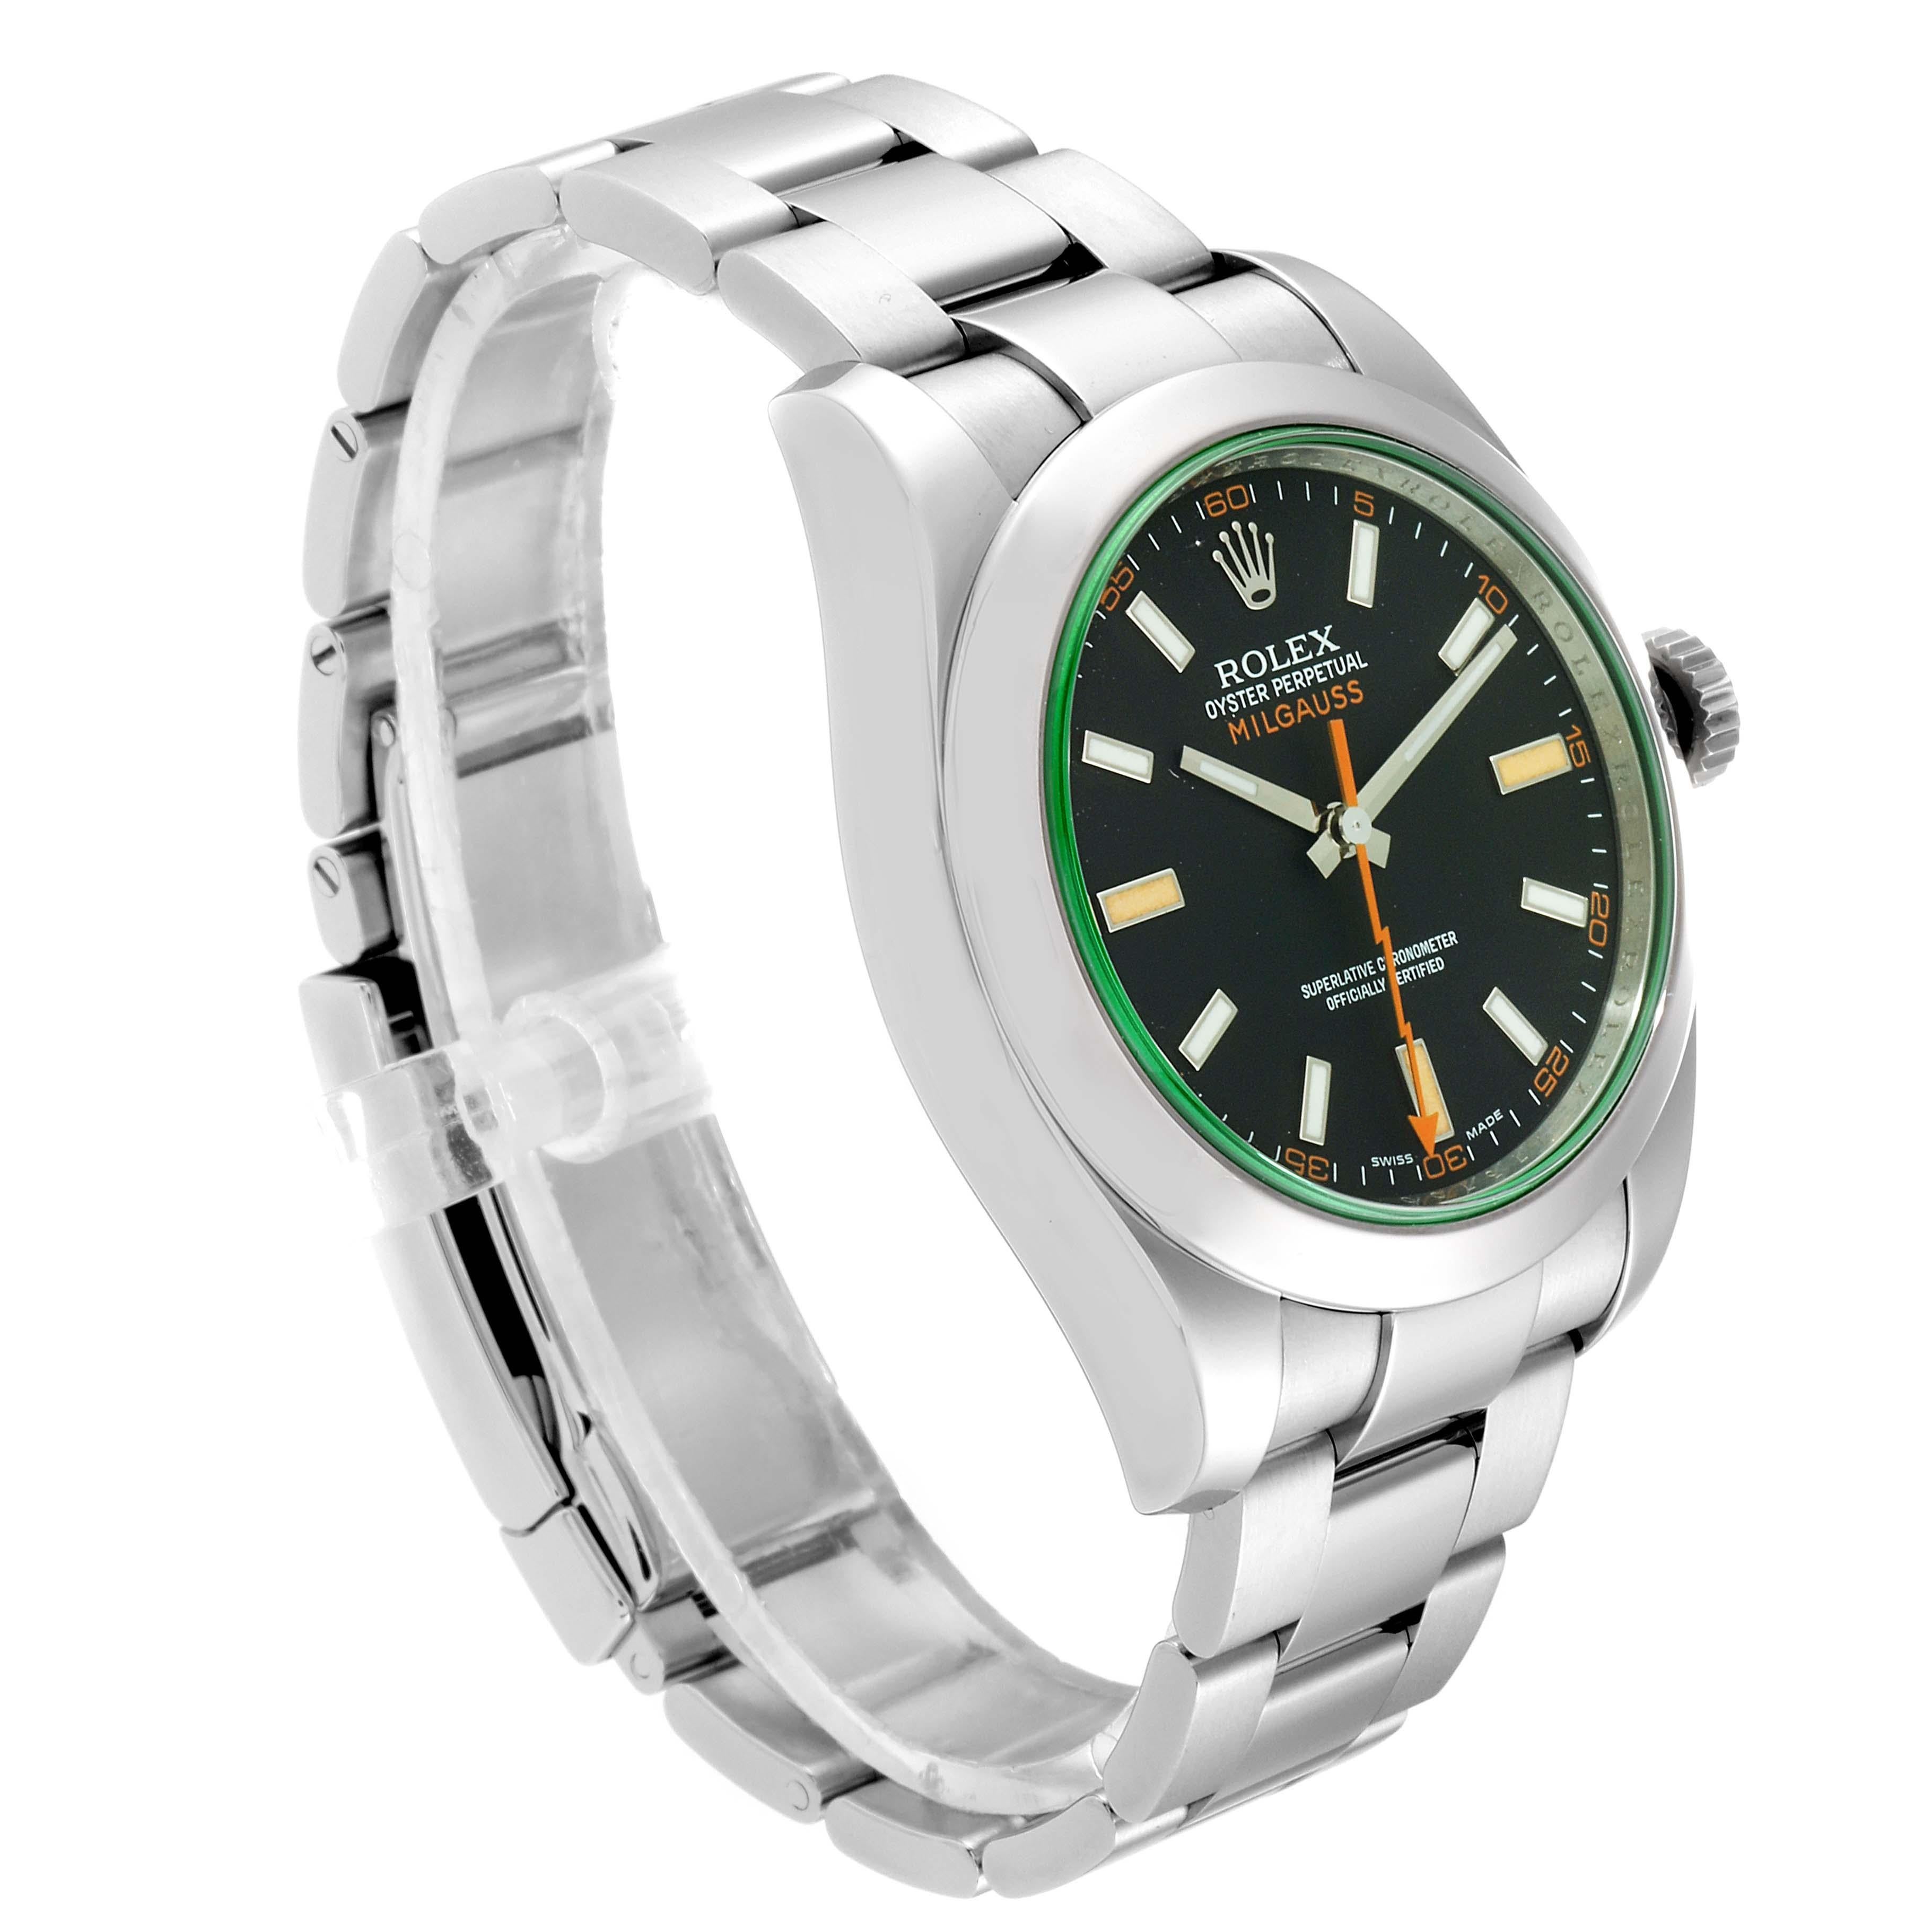 Rolex Milgauss Blue Dial Green Crystal Steel Men’s Watch 116400V In Excellent Condition For Sale In Atlanta, GA